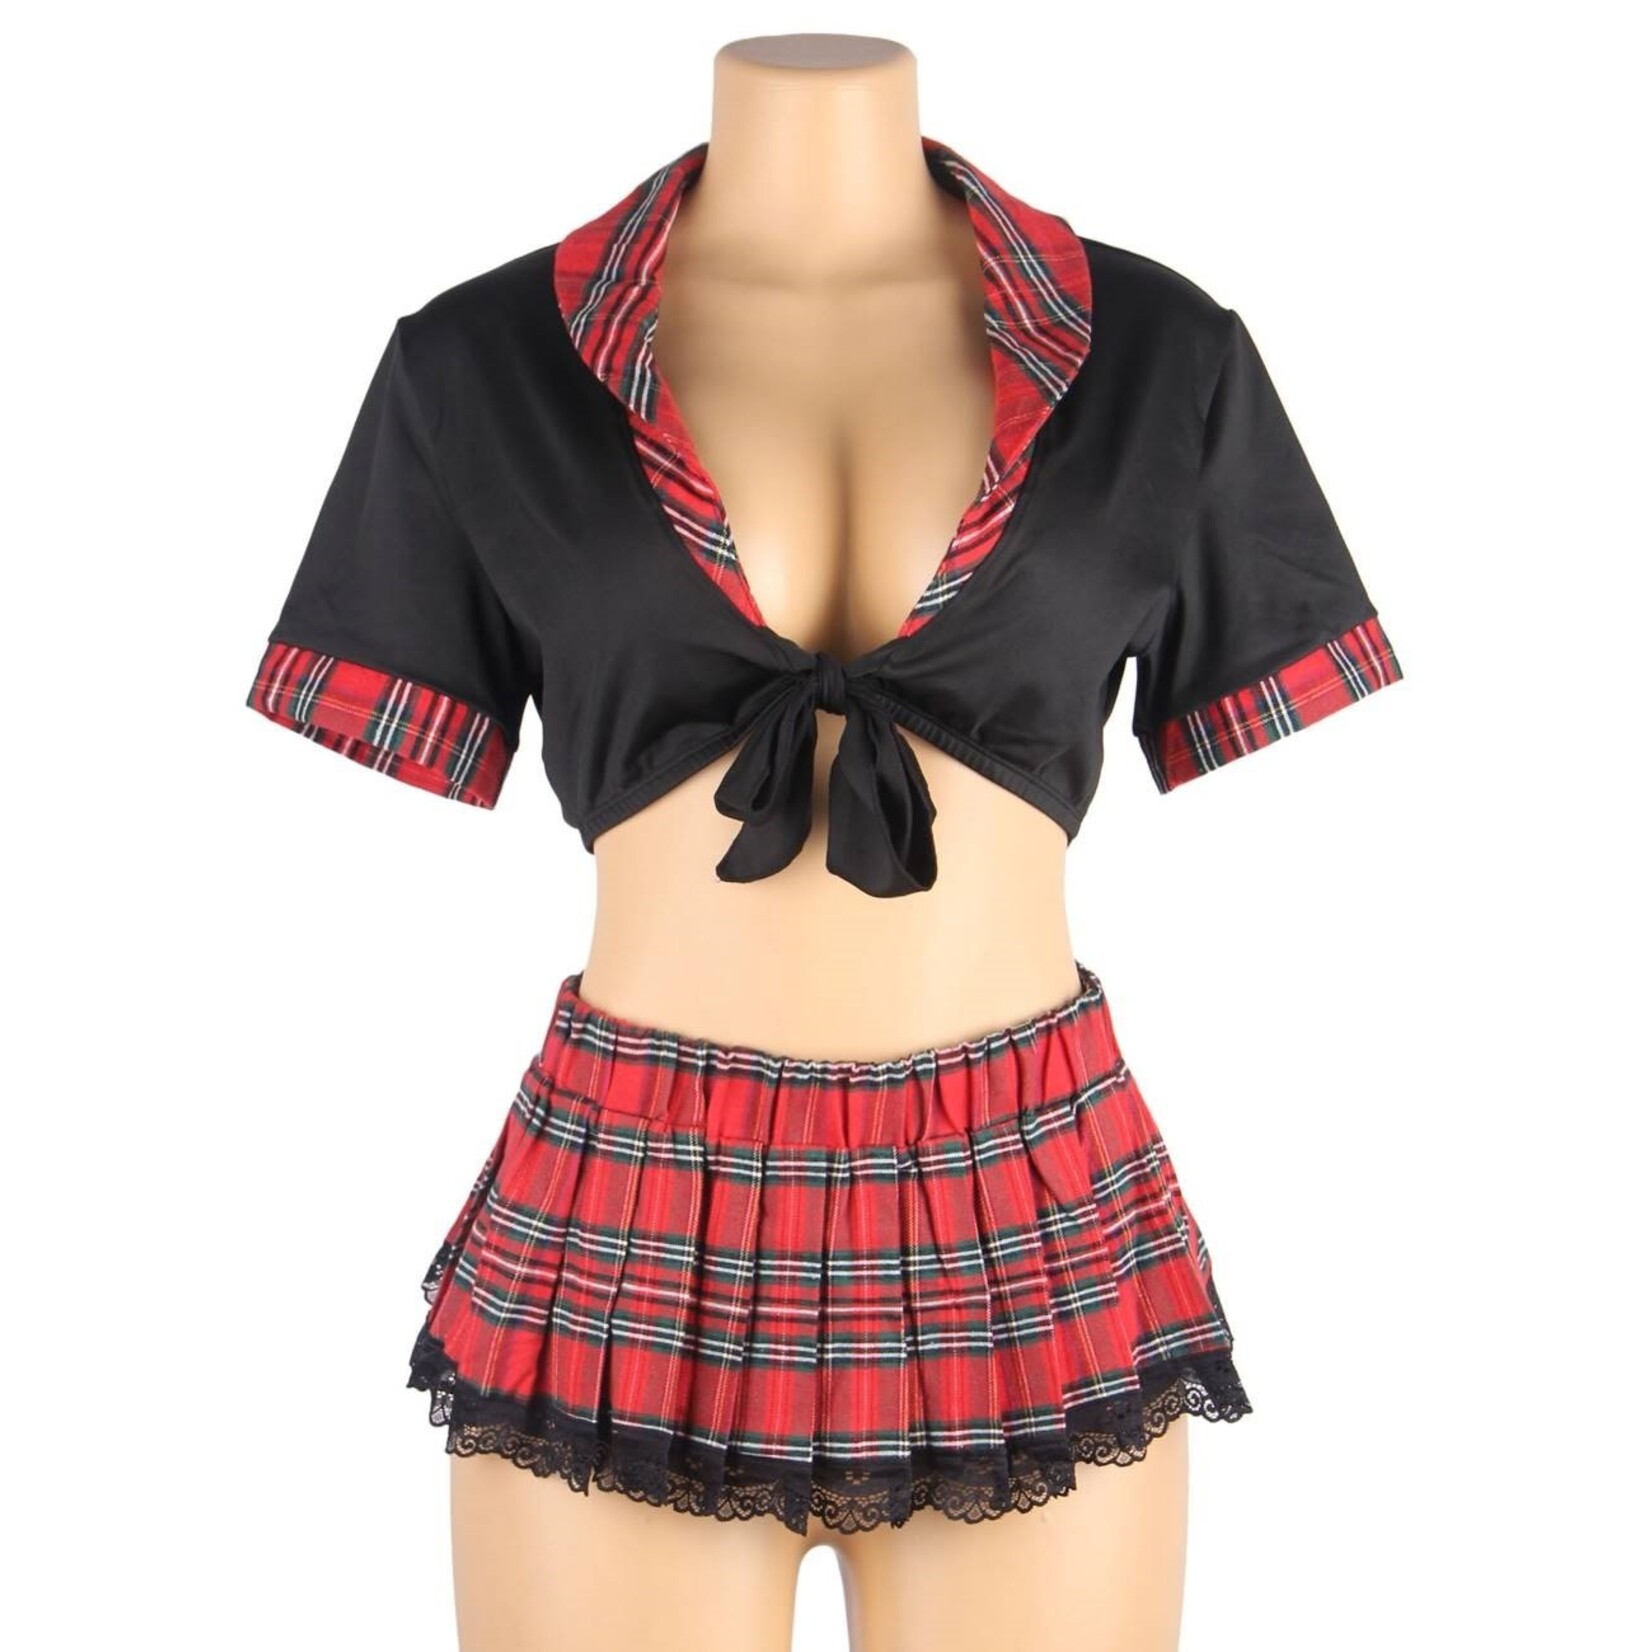 OH YEAH! -  SEXY UNIFORM HIGH-QUALITY STUDENT PLEATED SKIRT COLLEGE STYLE COSPLAY SUIT M-L